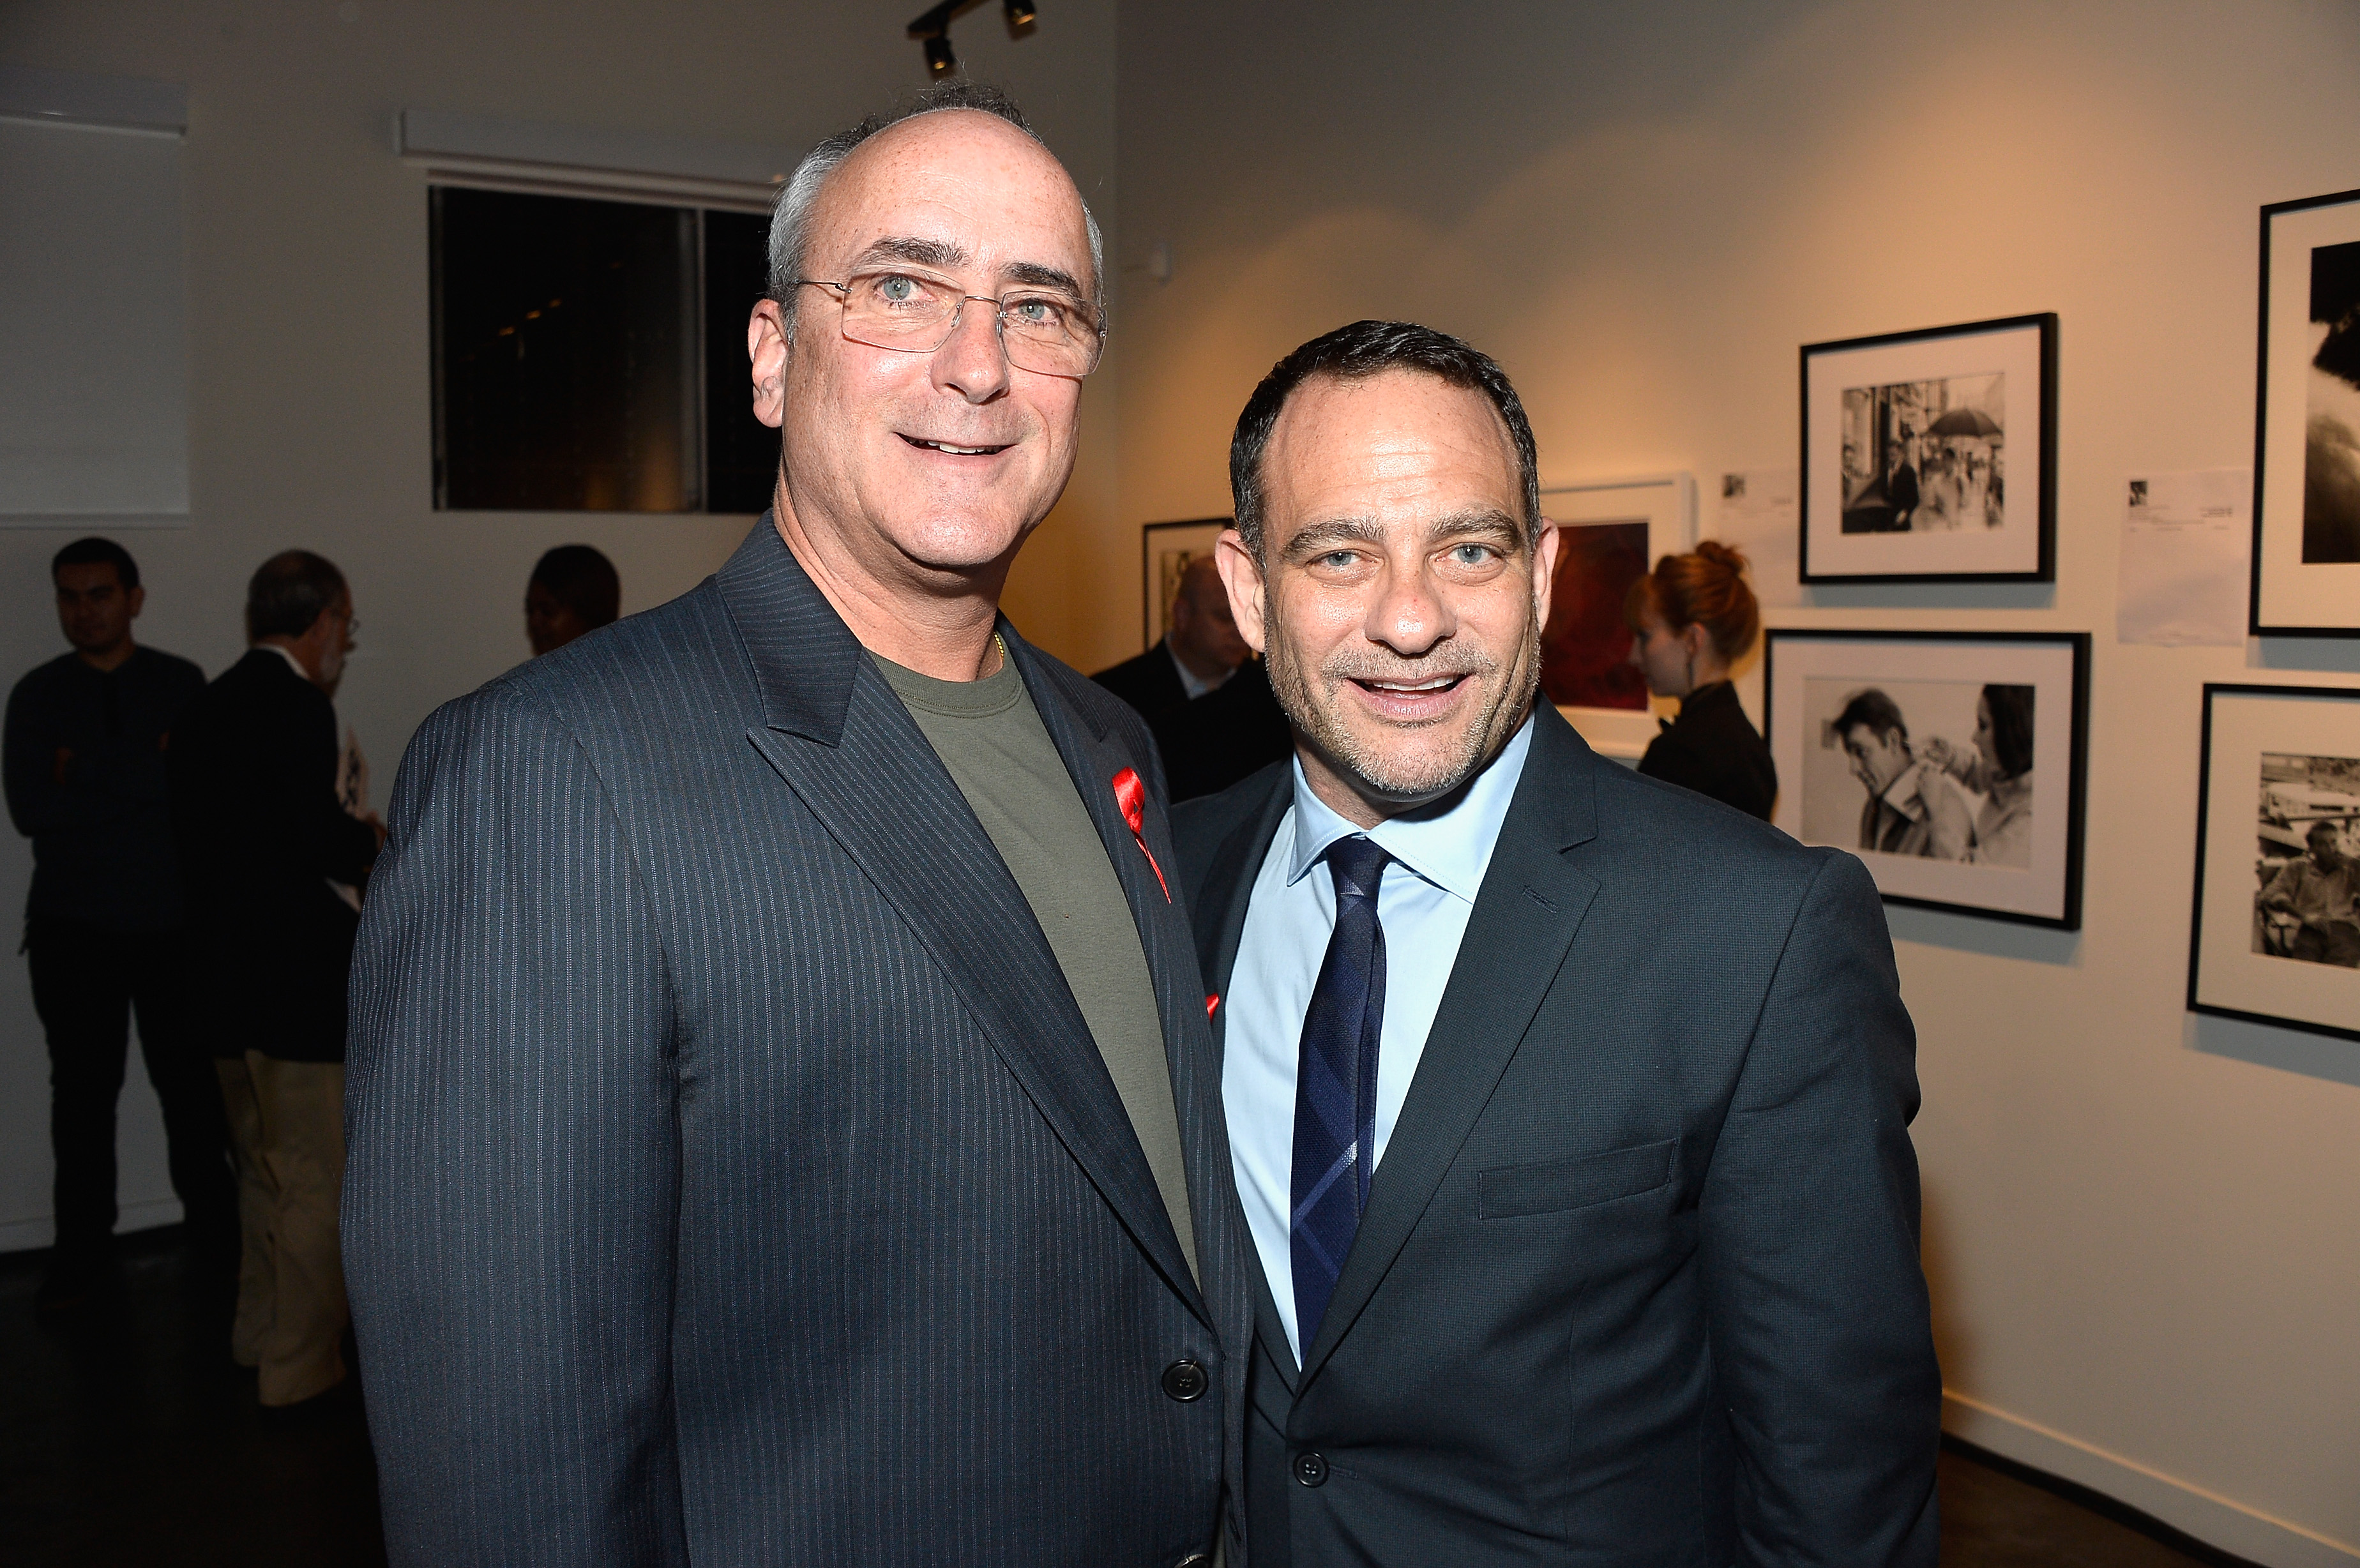 Christopher Wilding and Joel Goldman attend The Elizabeth Taylor AIDS Foundation Art Auction Benefit Presented By Wilding Cran Gallery on February 27, 2014 in Los Angeles, California. | Source: Getty Images